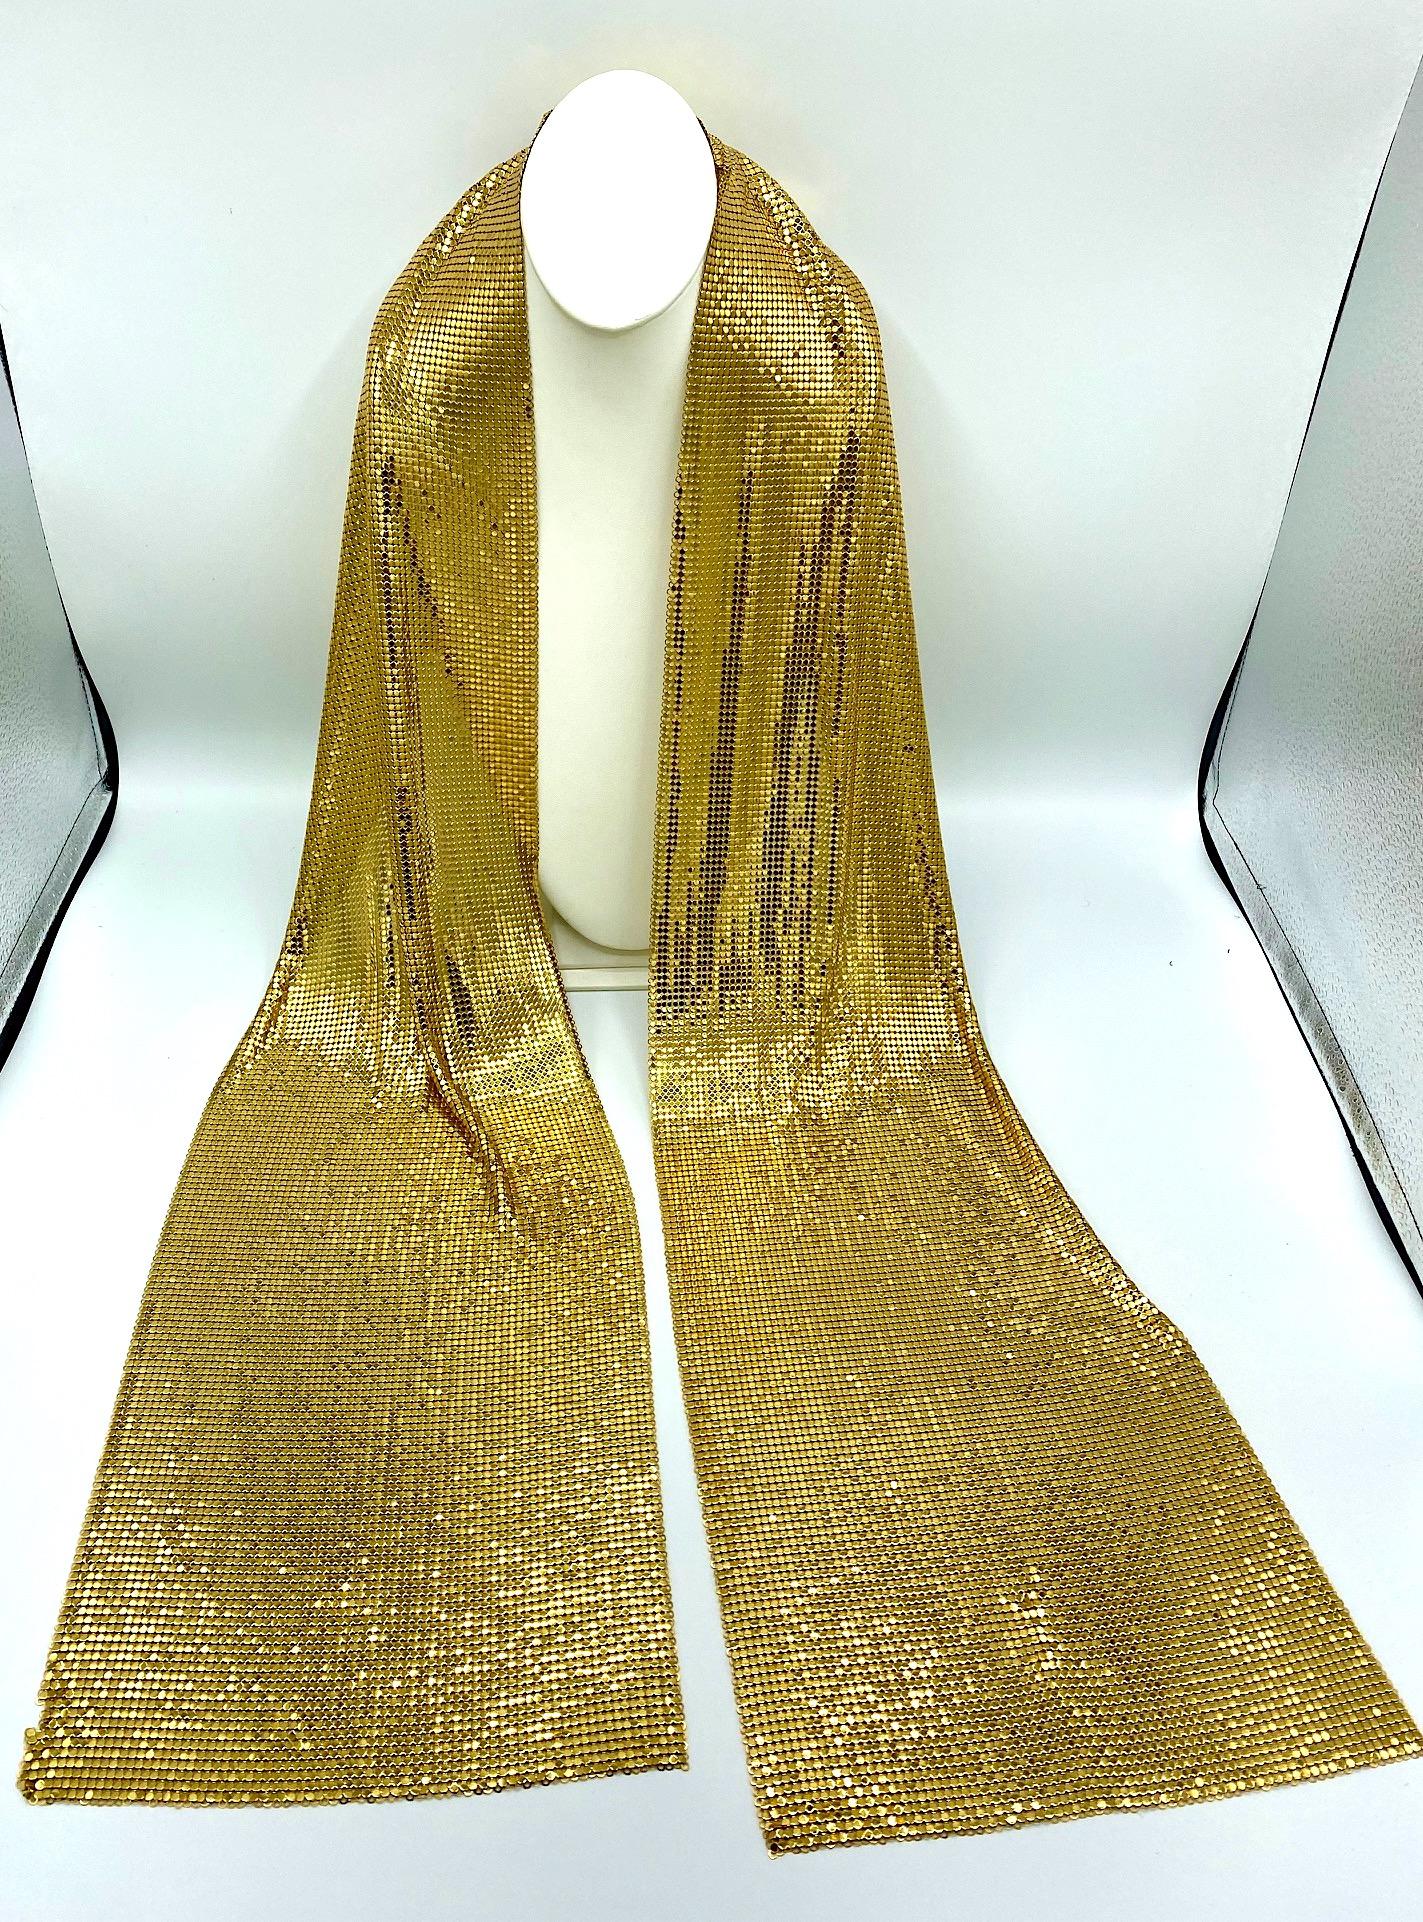 Attributed to the Whiting & Davis Company famous for their mesh bags, clothes and accessories is this eye catching gold mesh scarf from the 1970s to 1980s.  The scarf drapes beautifully around the neck to hang loosely or may be wrapped over a